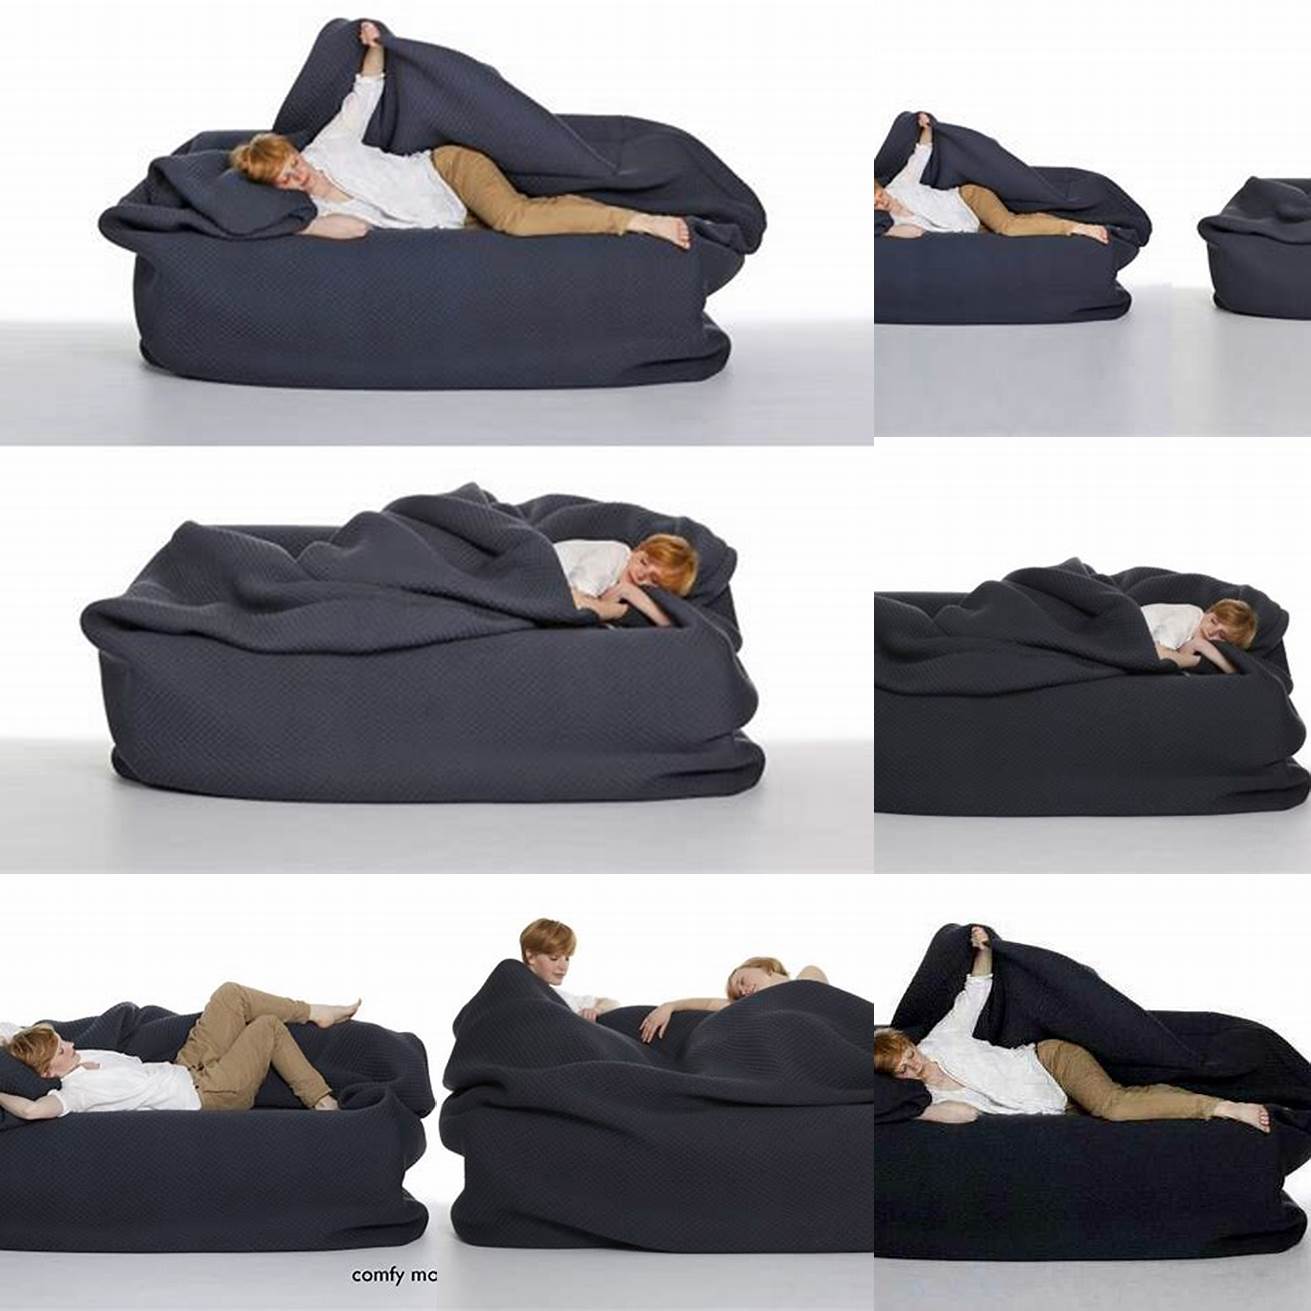 Image of the Bean Bag Bed with Built In Blanket in different colors